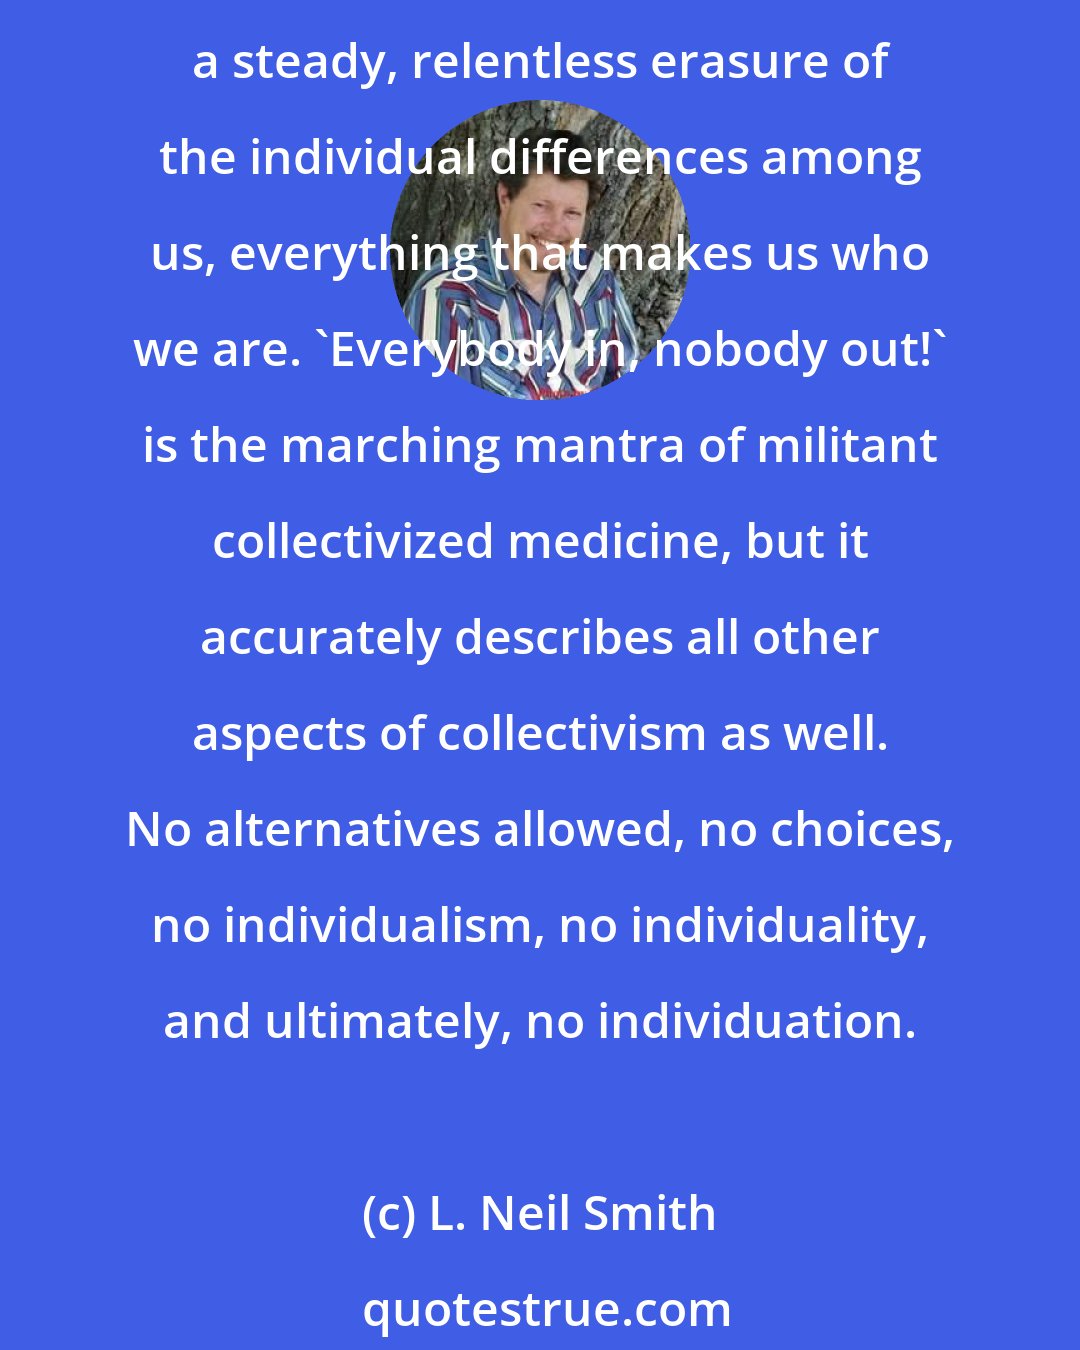 L. Neil Smith: Socialism, whether it's the 'soft tyranny' of the EuroAmerican management state or the murderously repressive forms taken by Hitler, Stalin, Mao, or Pol Pot, is all about disindividuation, a steady, relentless erasure of the individual differences among us, everything that makes us who we are. 'Everybody in, nobody out!' is the marching mantra of militant collectivized medicine, but it accurately describes all other aspects of collectivism as well. No alternatives allowed, no choices, no individualism, no individuality, and ultimately, no individuation.